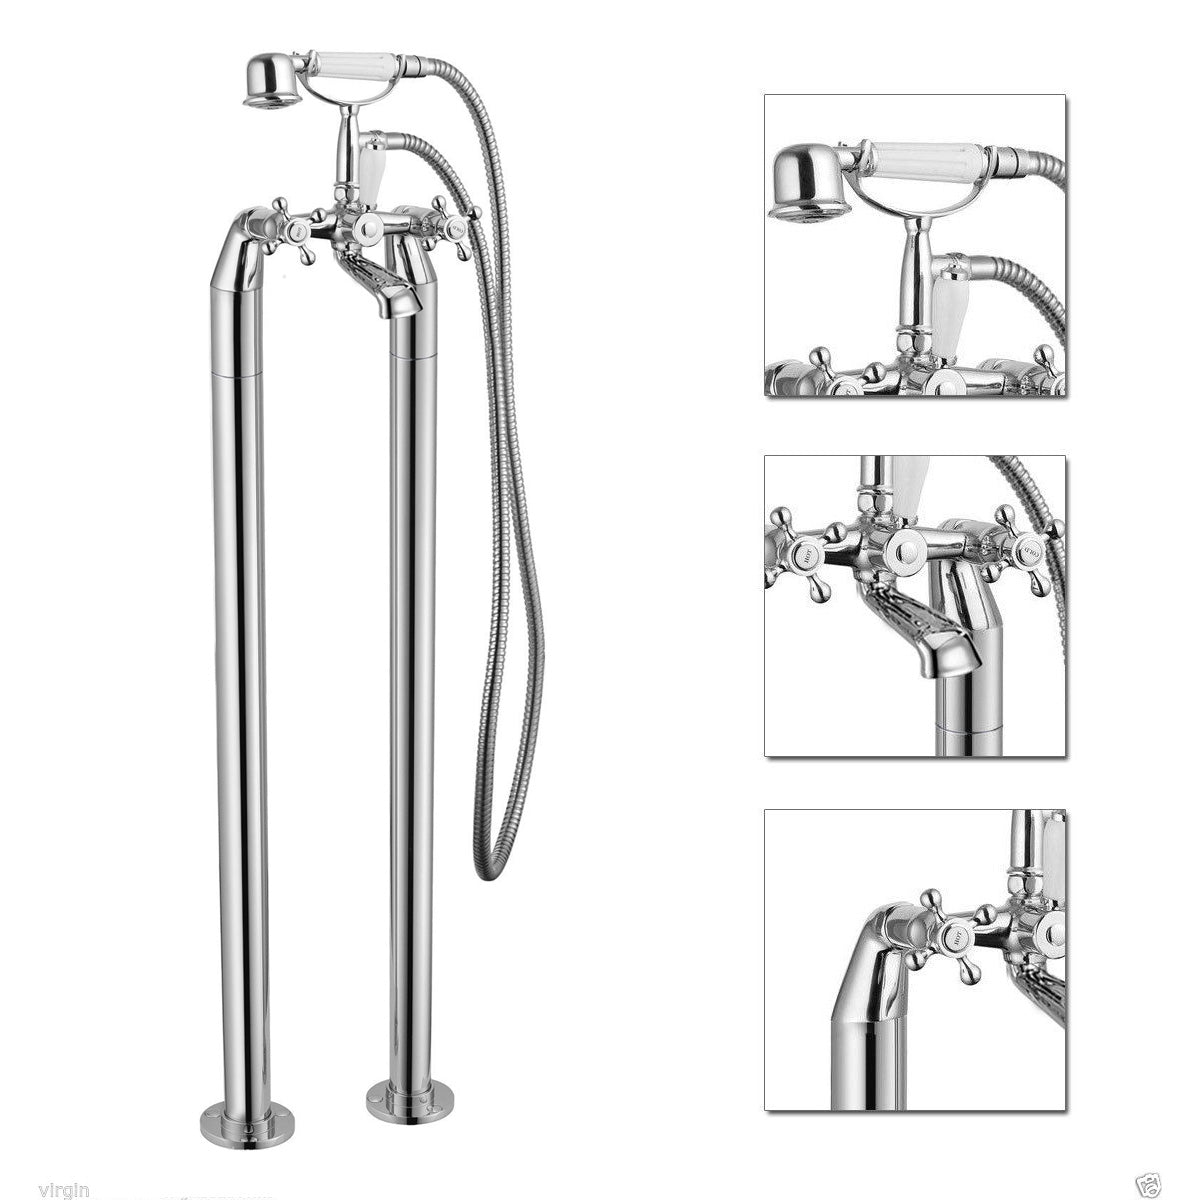 Stafford Victorian Style Freestanding Bath Shower Mixer Tap With Handheld and Holder